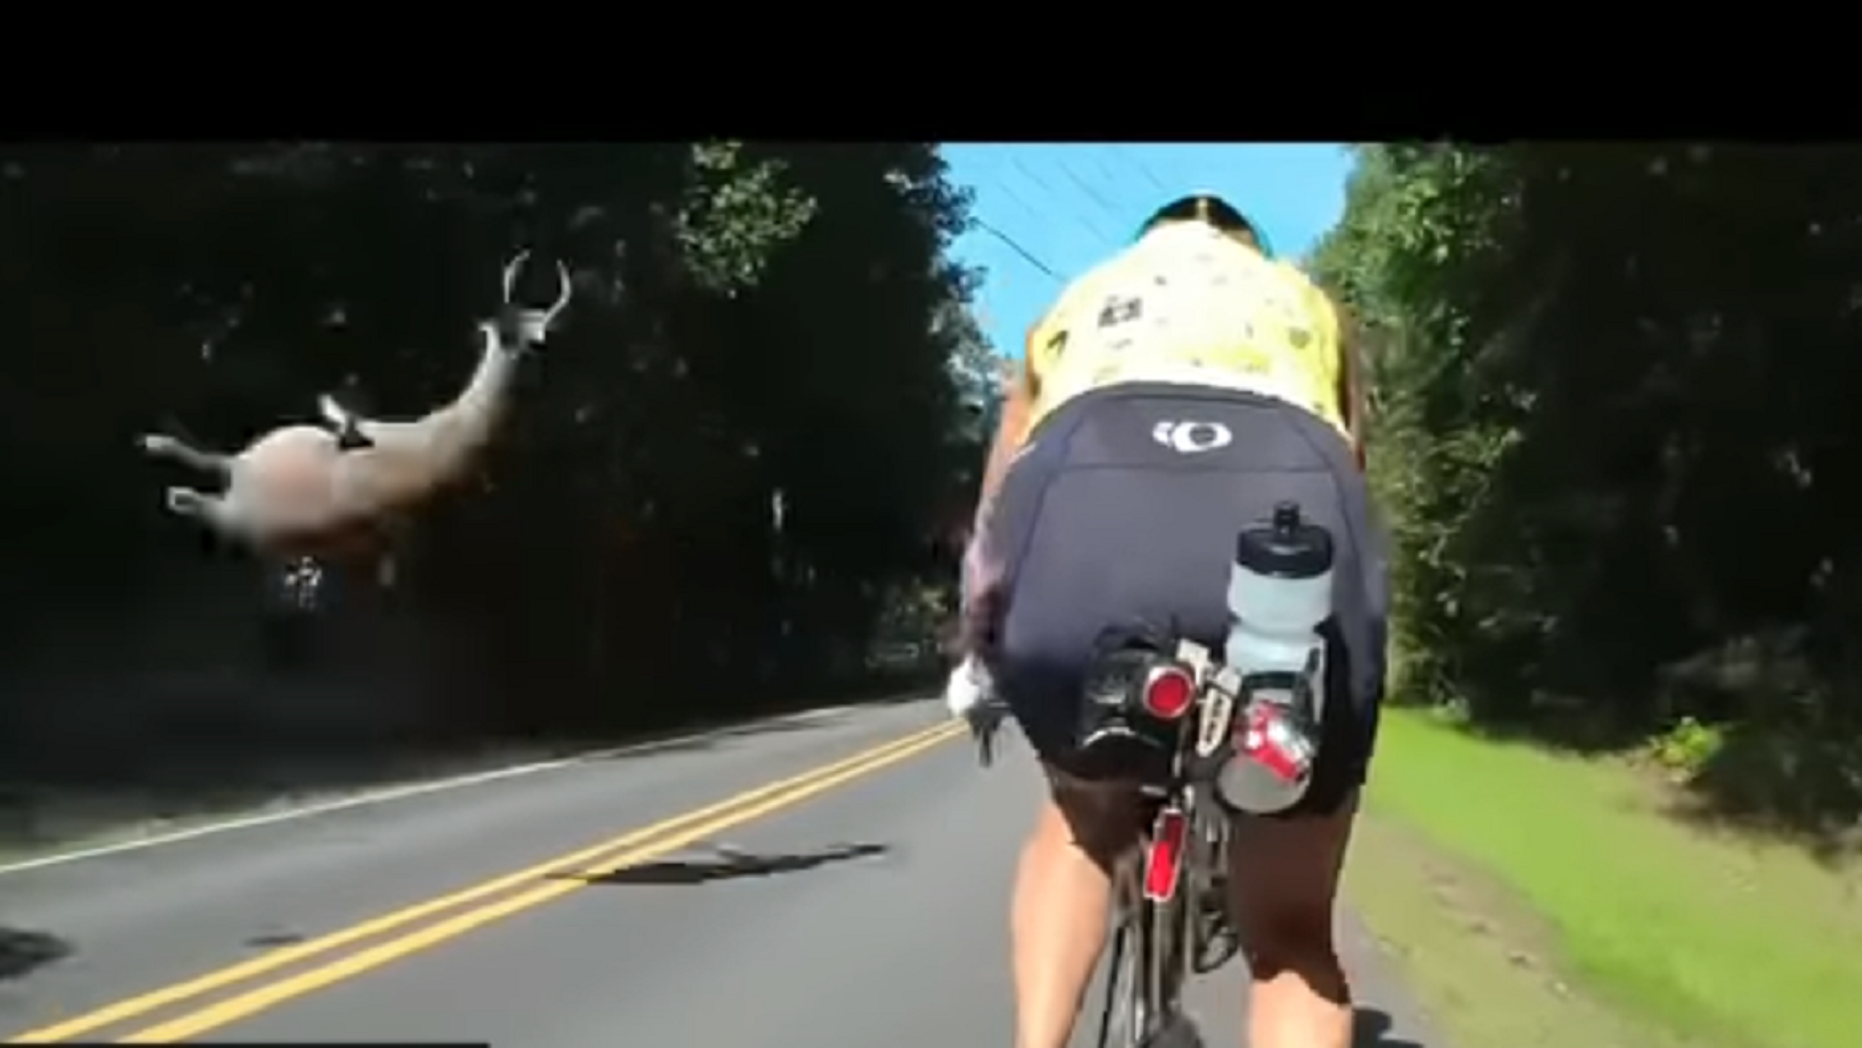 Graphic video footage captures a deer being struck by a car in North Carolina.